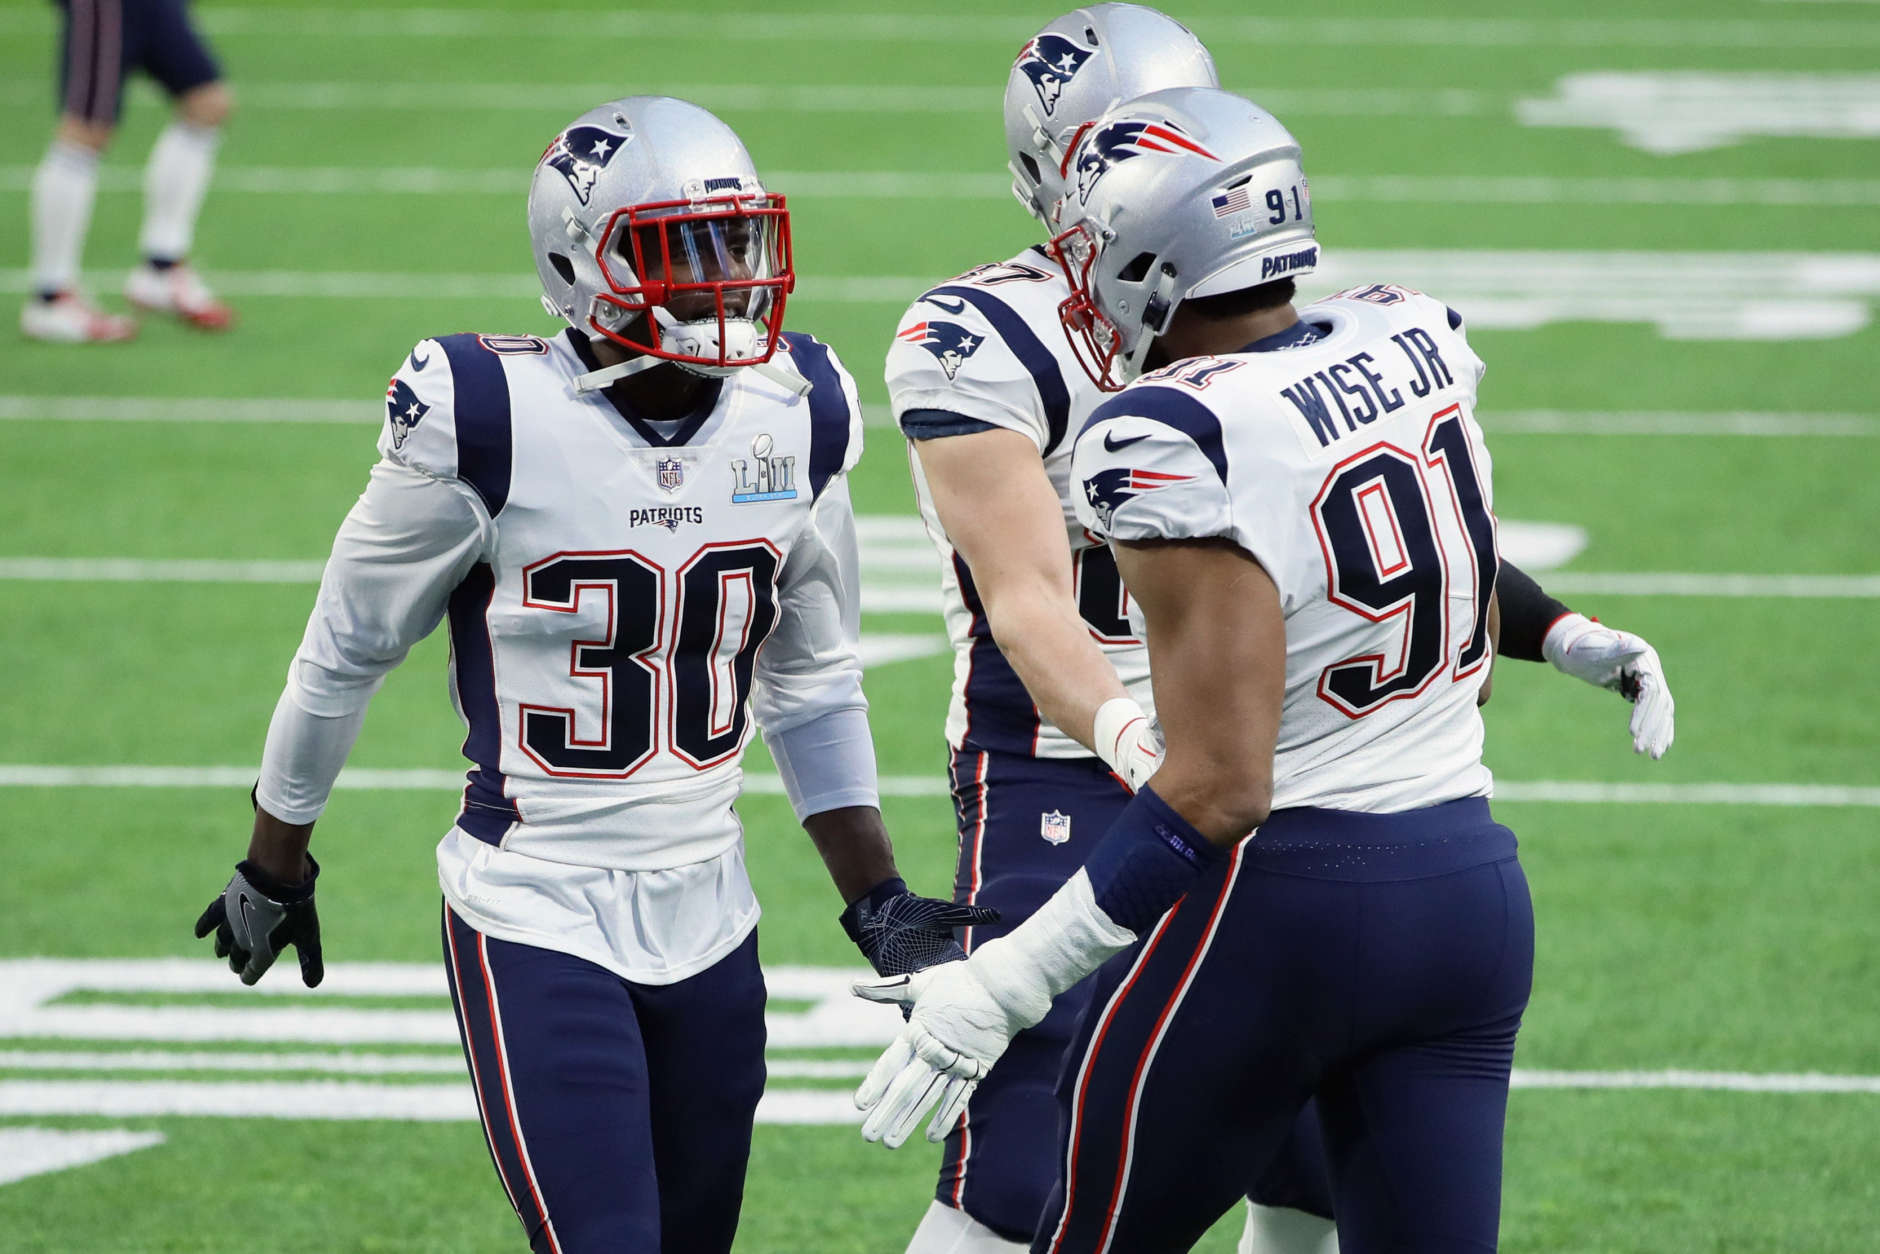 MINNEAPOLIS, MN - FEBRUARY 04:  Duron Harmon #30, Rob Gronkowski #87 and Deatrich Wise #91 of the New England Patriots warm up prior to Super Bowl LII against the Philadelphia Eagles at U.S. Bank Stadium on February 4, 2018 in Minneapolis, Minnesota.  (Photo by Jonathan Daniel/Getty Images)